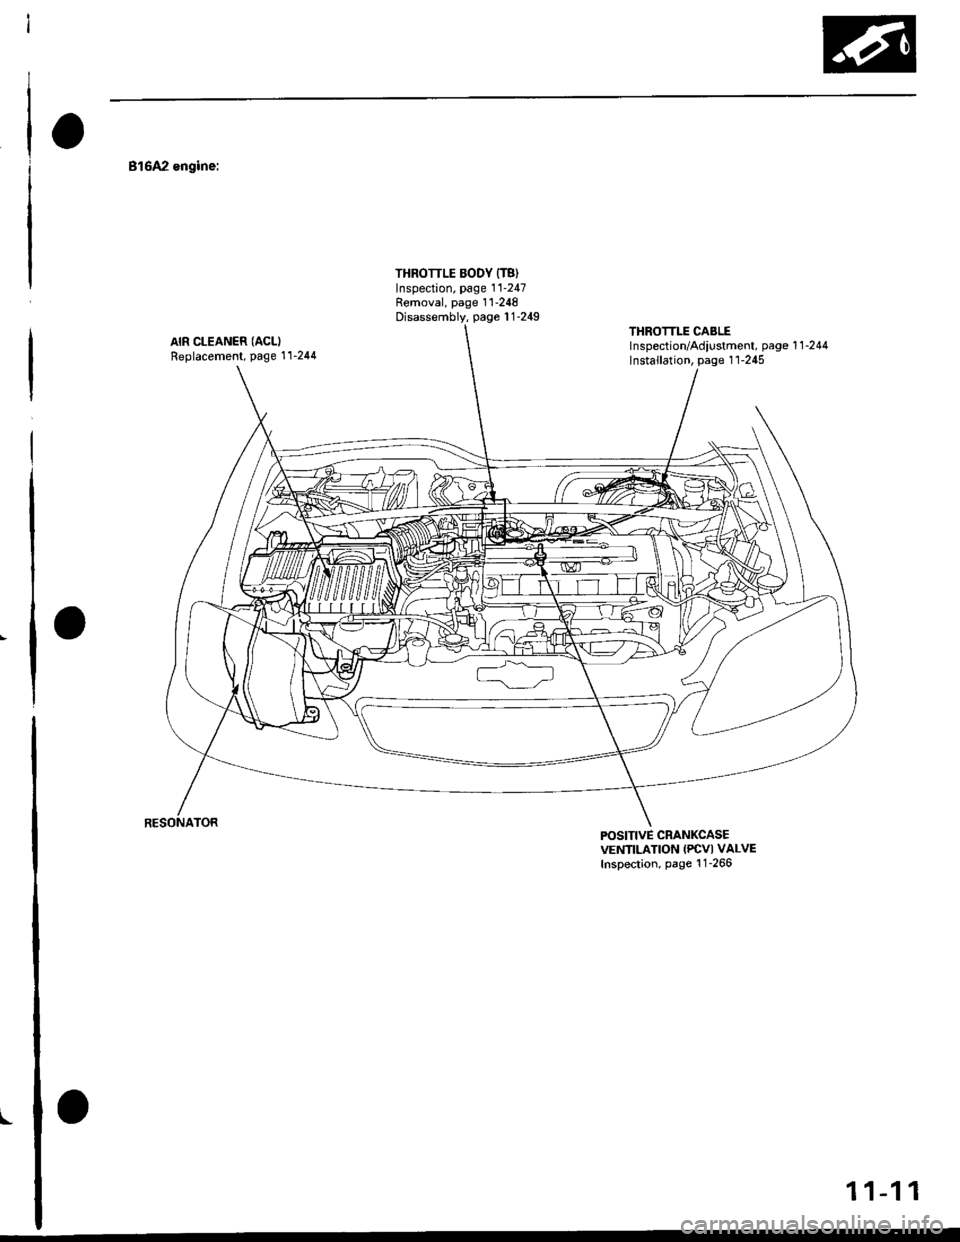 HONDA CIVIC 1999 6.G Workshop Manual \-
816A2 engine:
AIR CLEANER (ACLI
Replacement, Page 11-244
THROTTLE BODY {T8)Inspection. page 11-247Removal, page 1 1-248
Disassembly, page 1 1-249THROTTLE CABLElnspection/Adiustment, page 1 1 -244
